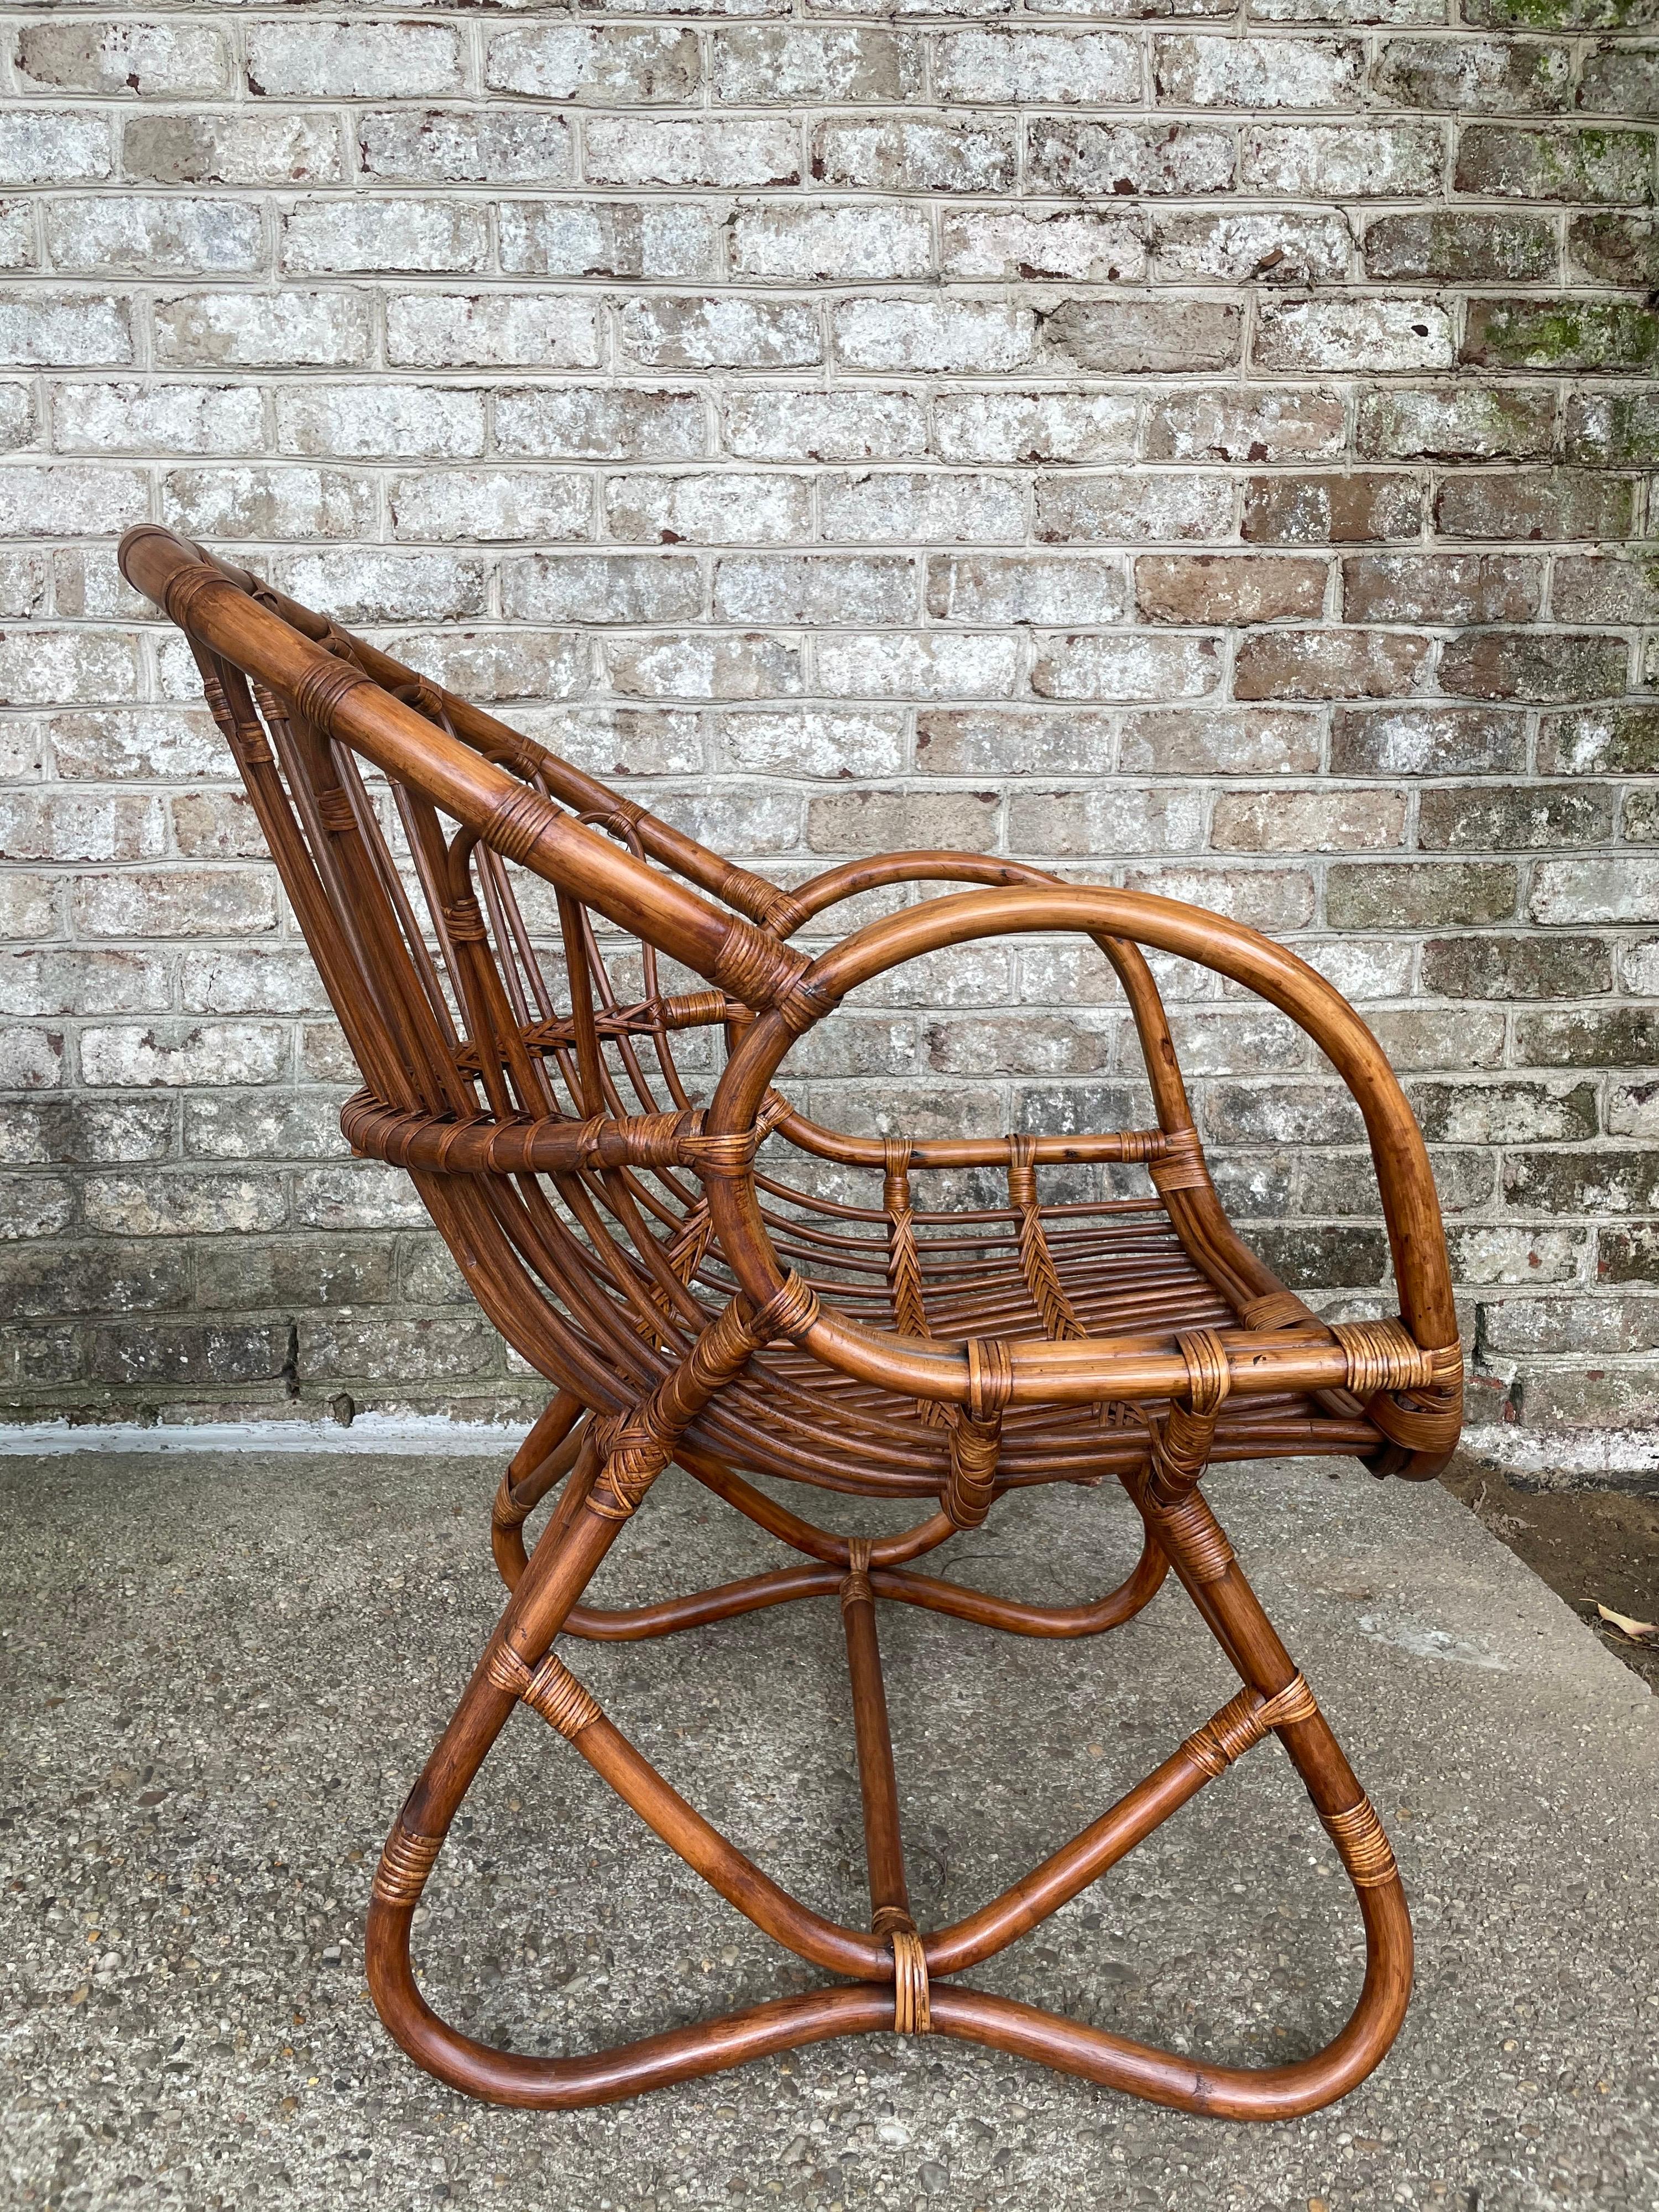 These wonderful vintage bent bamboo and rattan armchairs are intricately designed. No cushions or lambskin shown is included. Very comfortable as they are and restored to their original beauty.